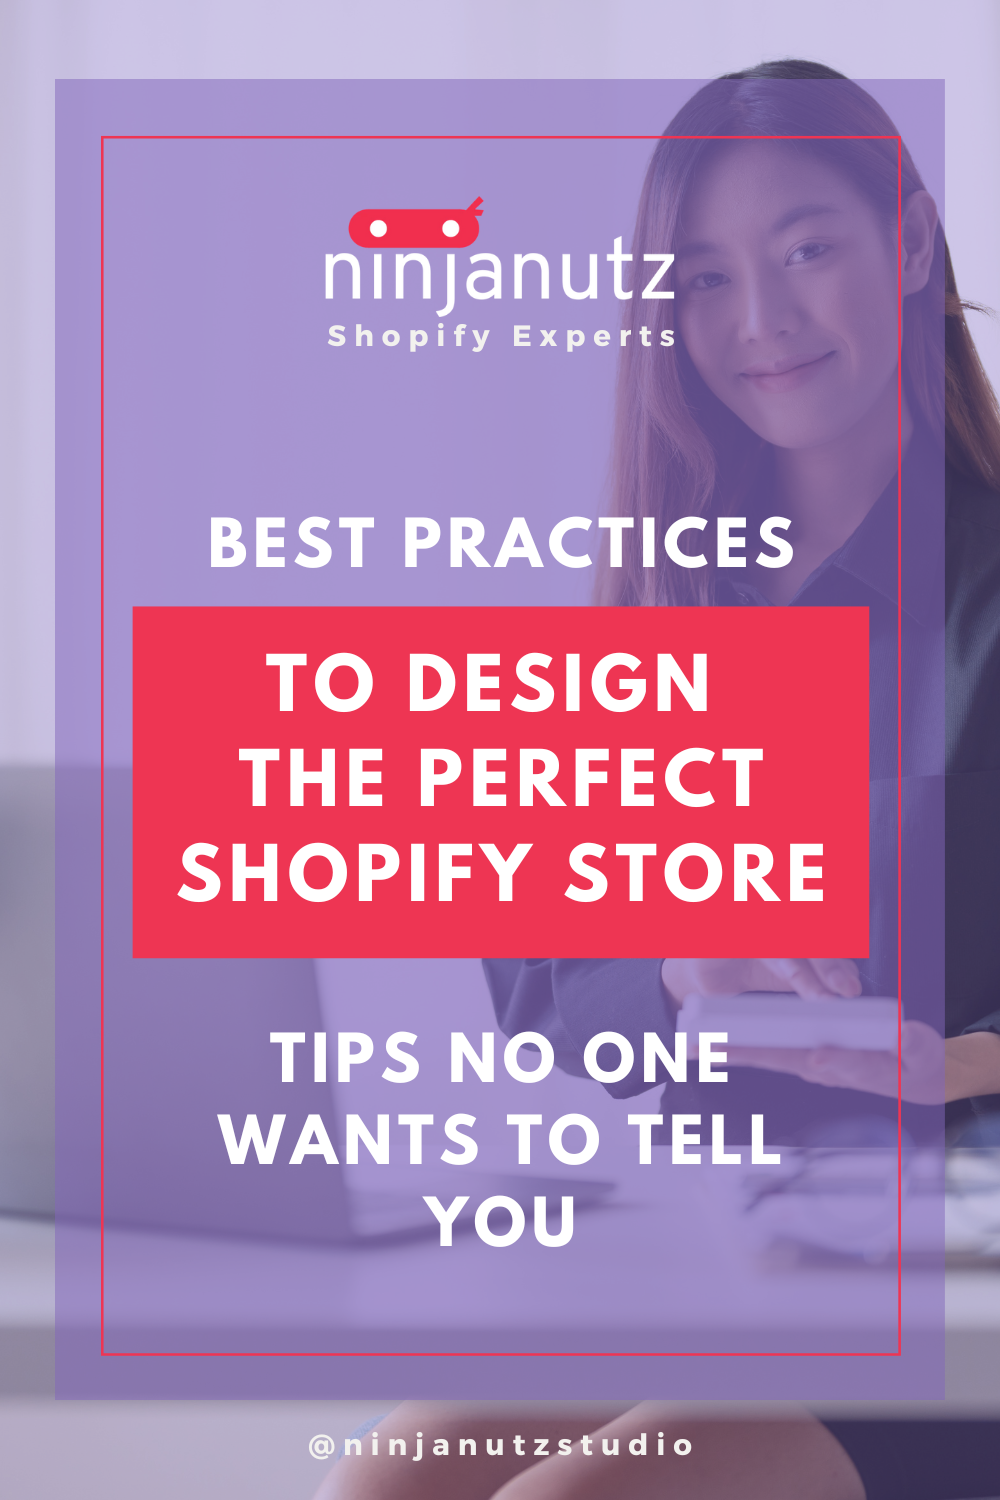 Best Practices to Design the Perfect Shopify Store - Tips No One Wants to Tell You